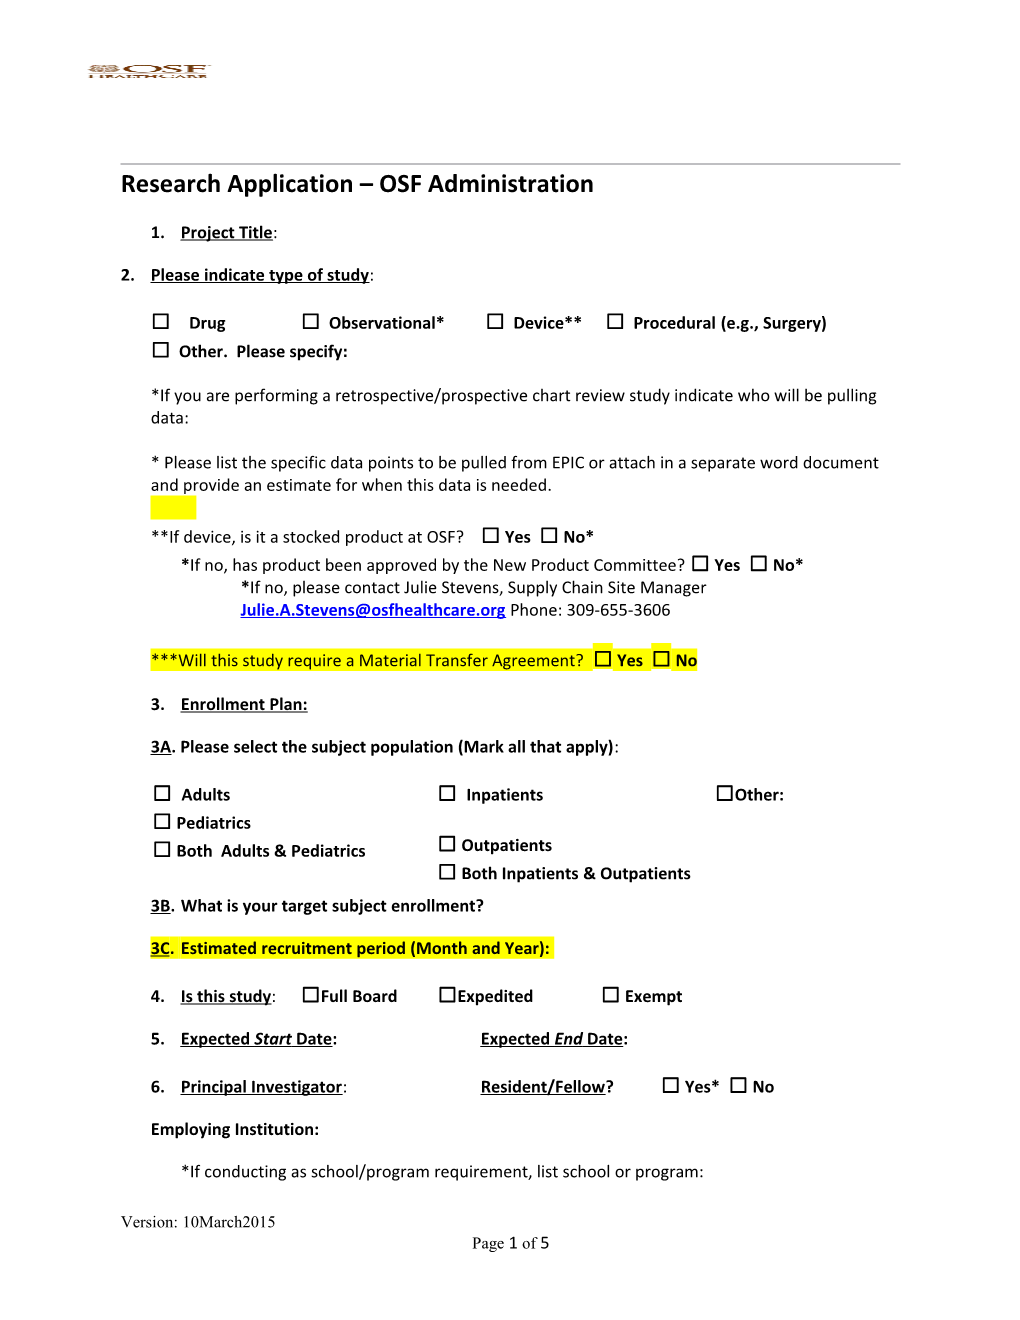 Research Application OSF Administration